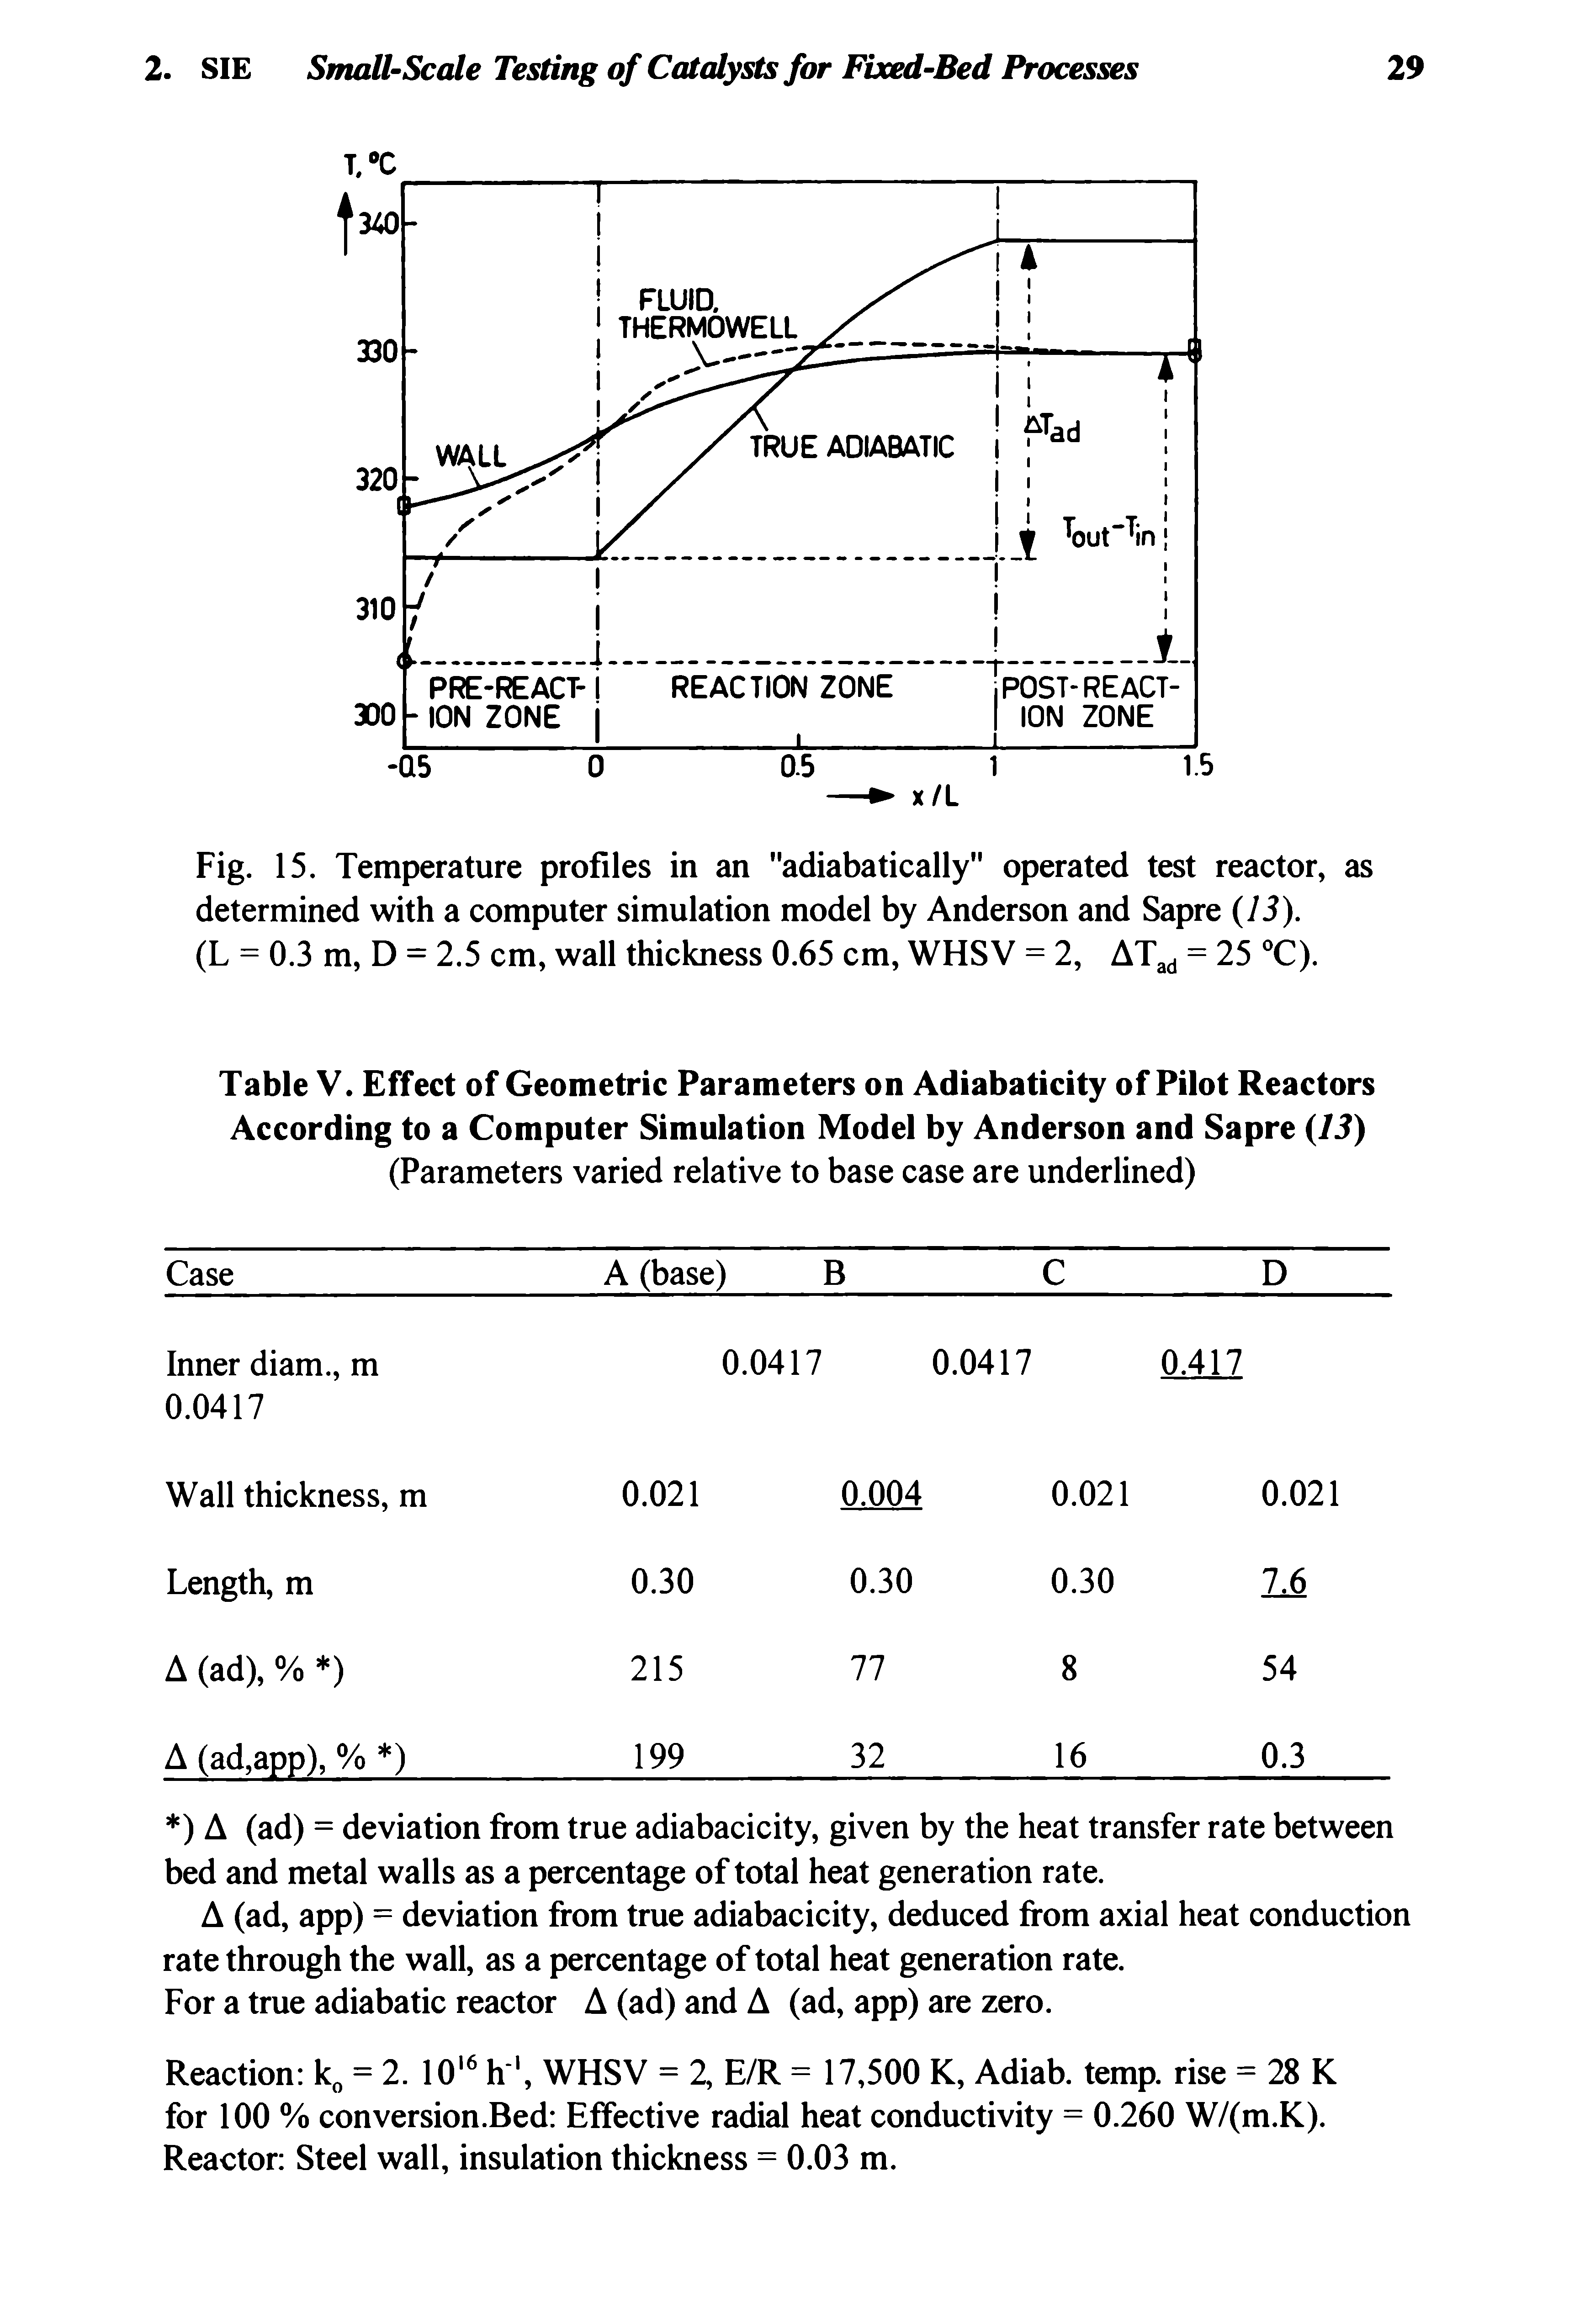 Table V. Effect of Geometric Parameters on Adiabaticity of Pilot Reactors According to a Computer Simulation Model by Anderson and Sapre 13) (Parameters varied relative to base case are underlined)...